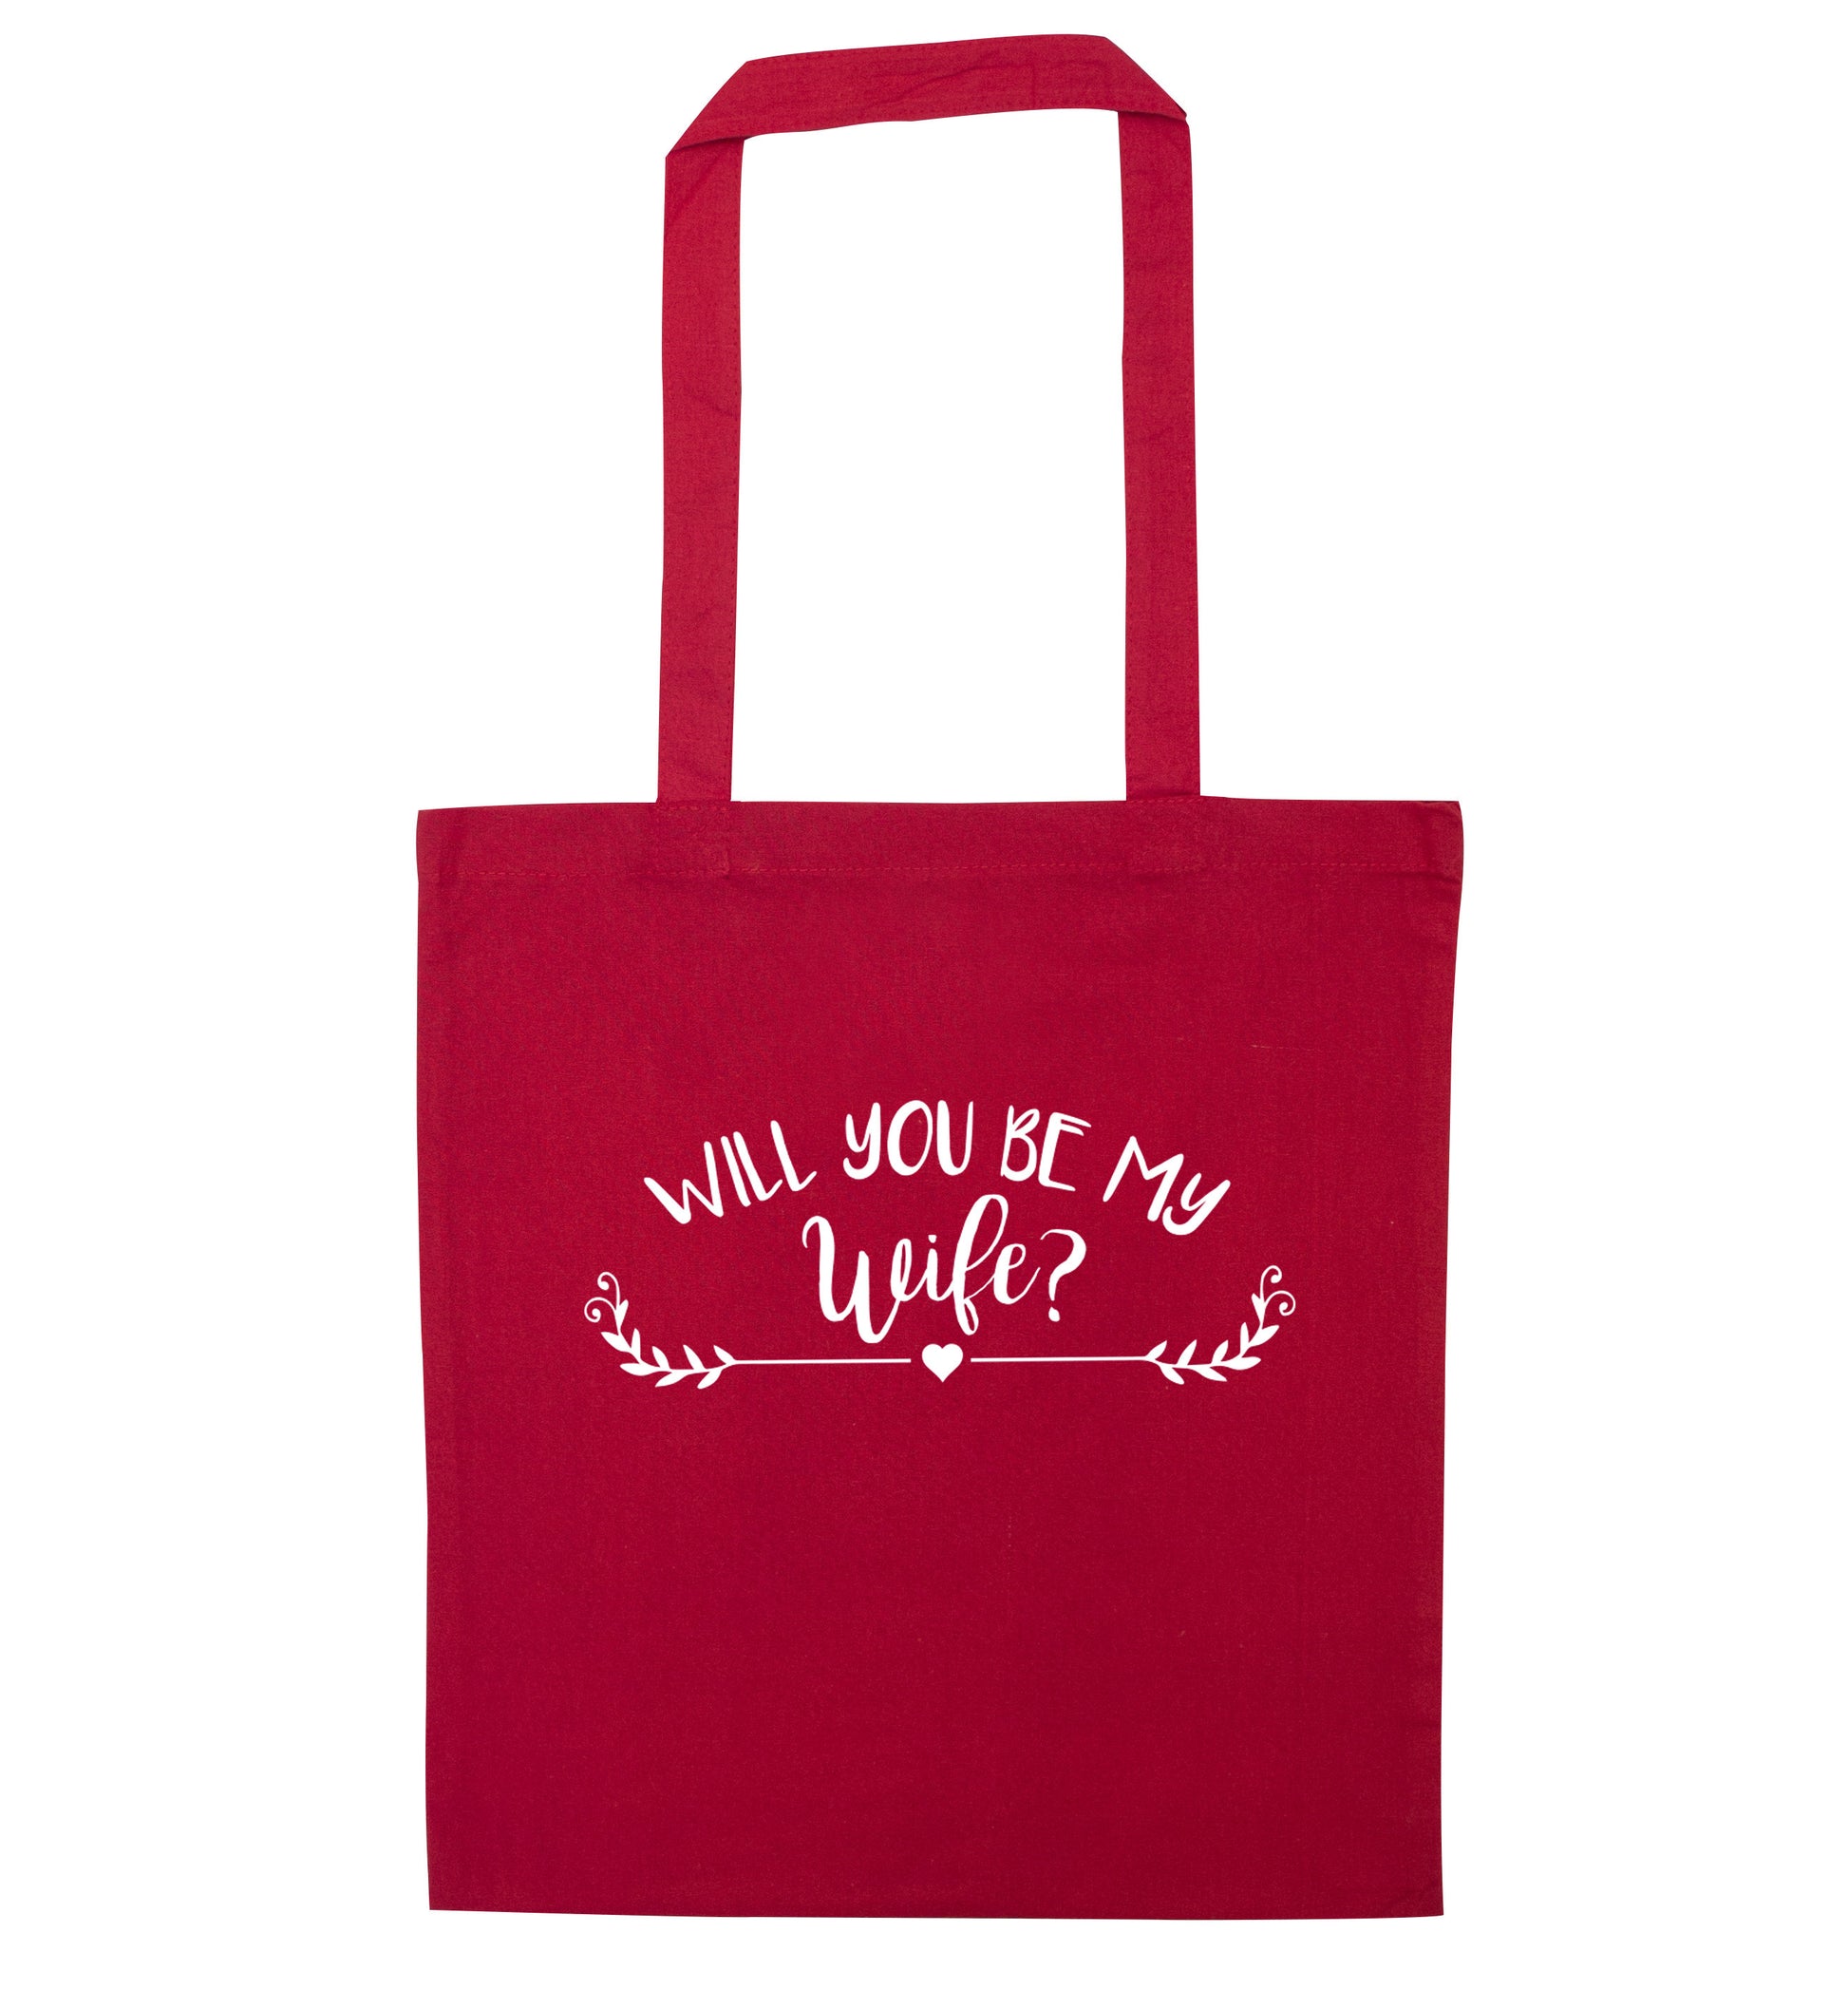 Will you be my wife? red tote bag